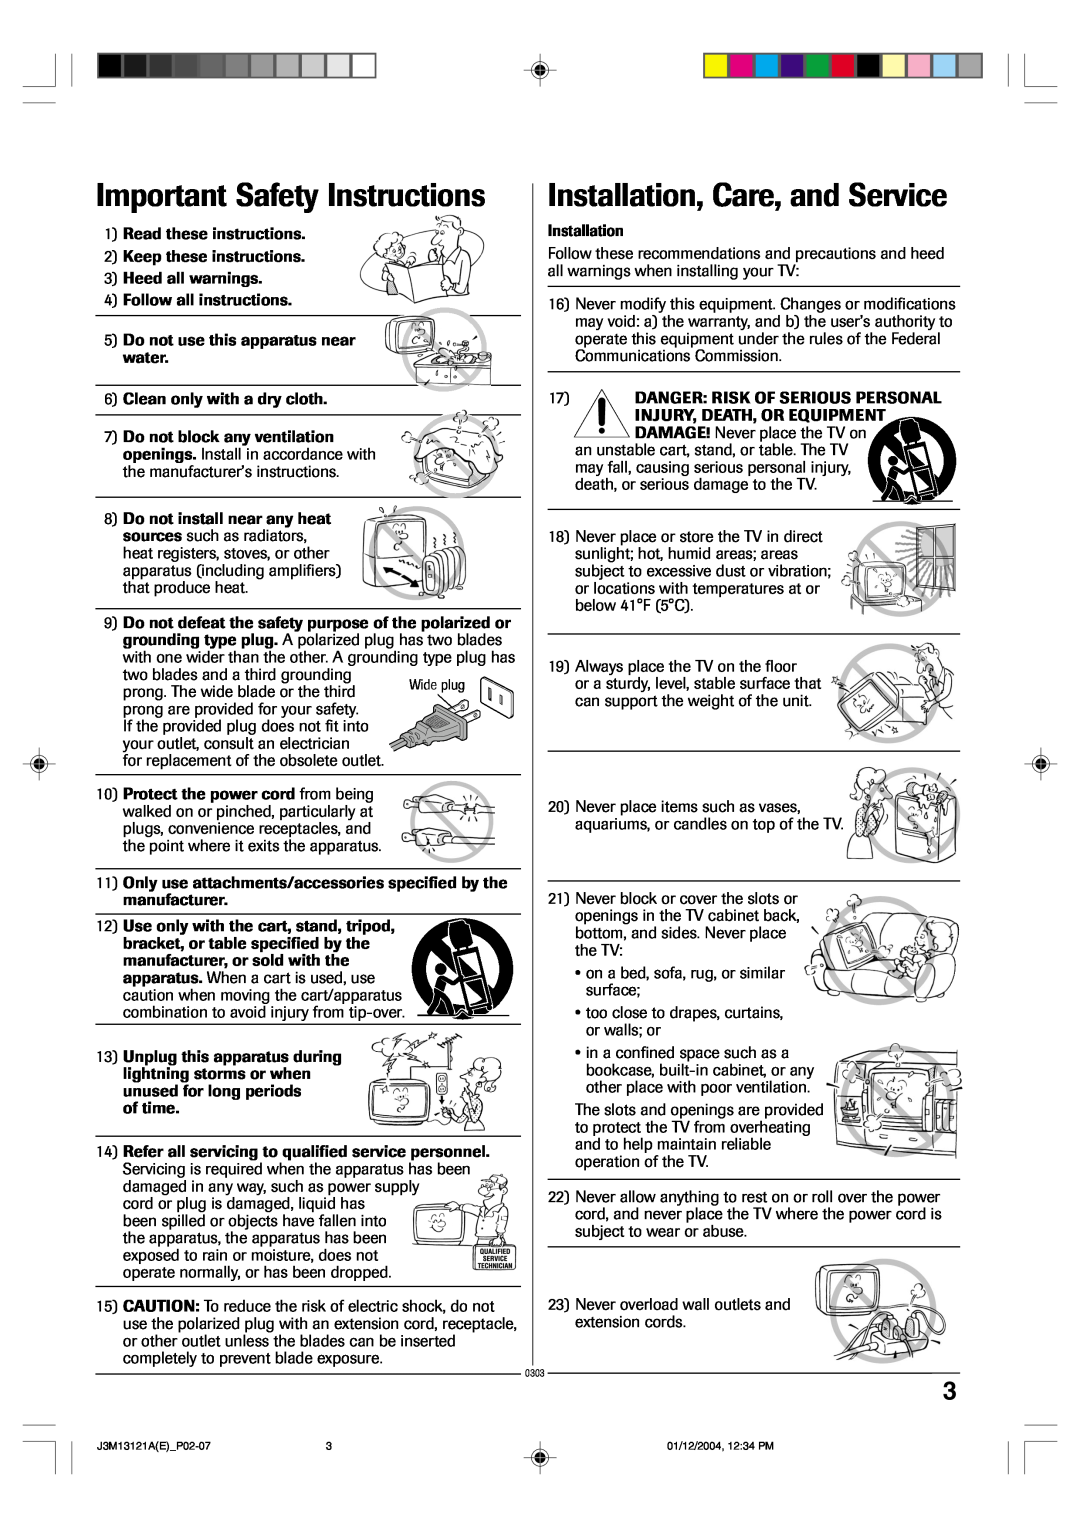 Toshiba 13A25 manual Important Safety Instructions, Installation, Care, and Service 